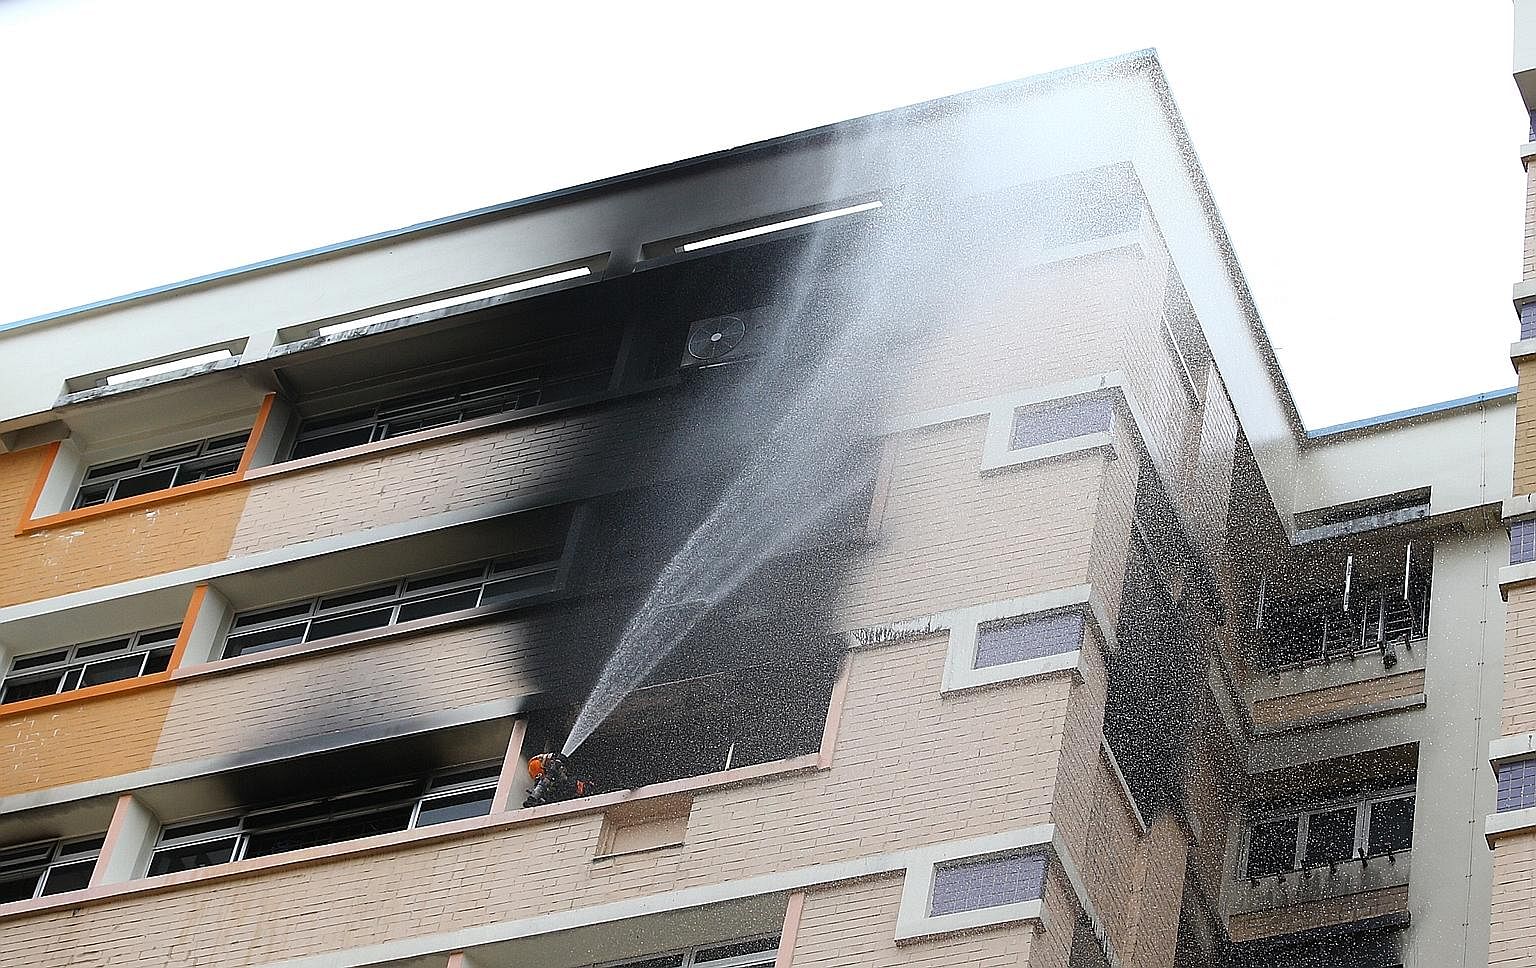 If a neighbouring unit is ablaze and rescuers have not arrived, it is advisable to leave, alert one's neighbours, and evacuate to a refuge floor or to the ground level without using the lifts.